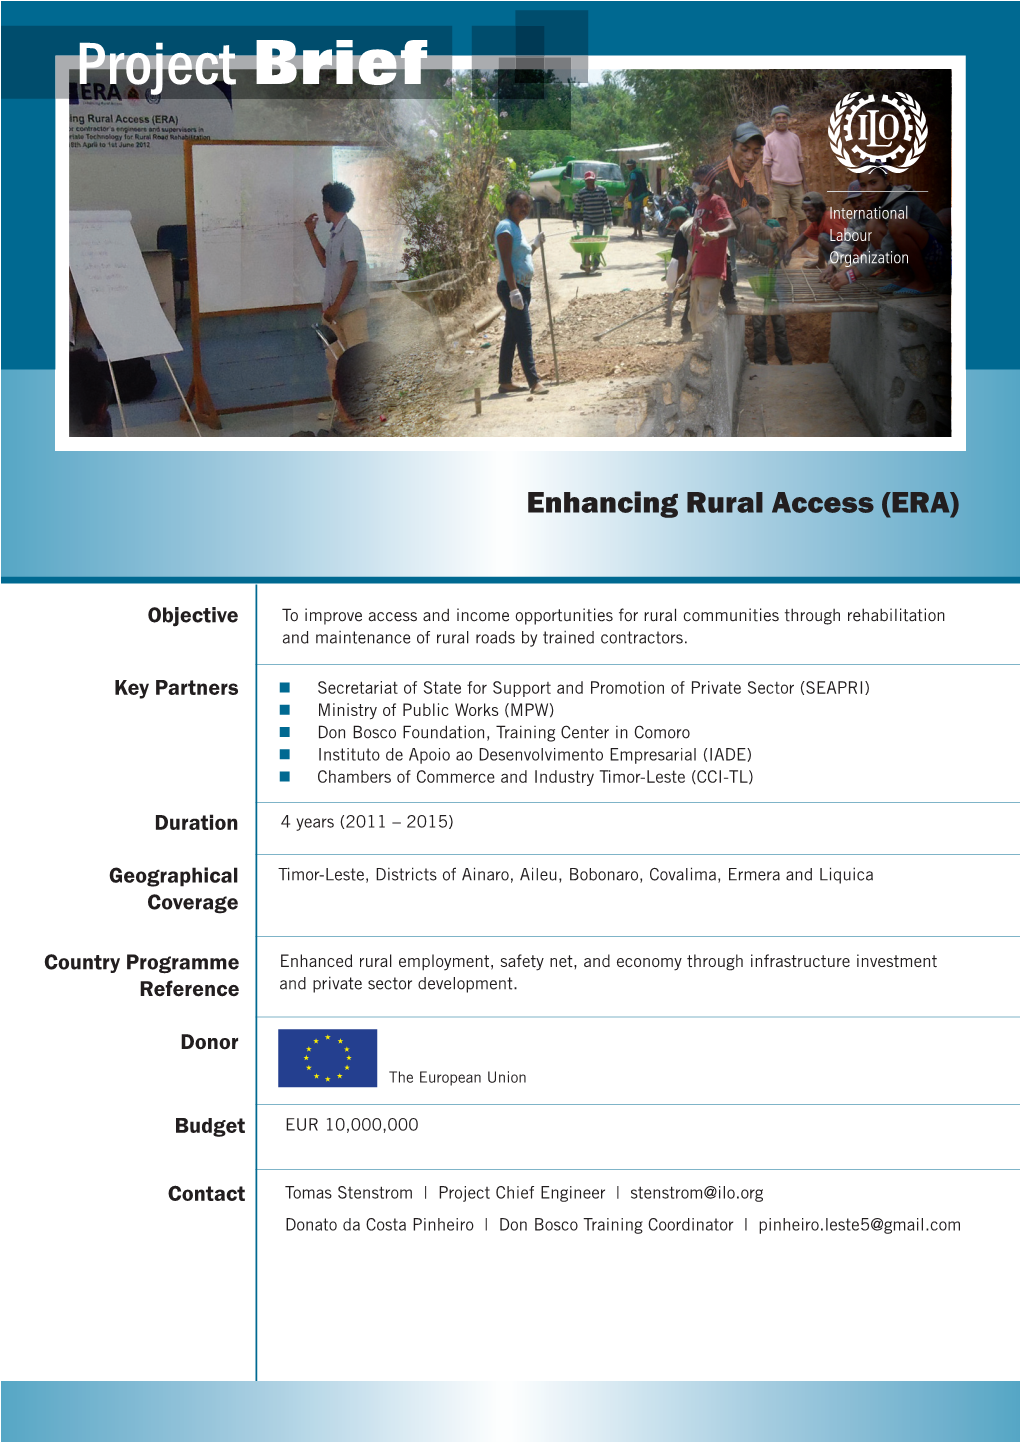 Project Brief: Enhancing Rural Access